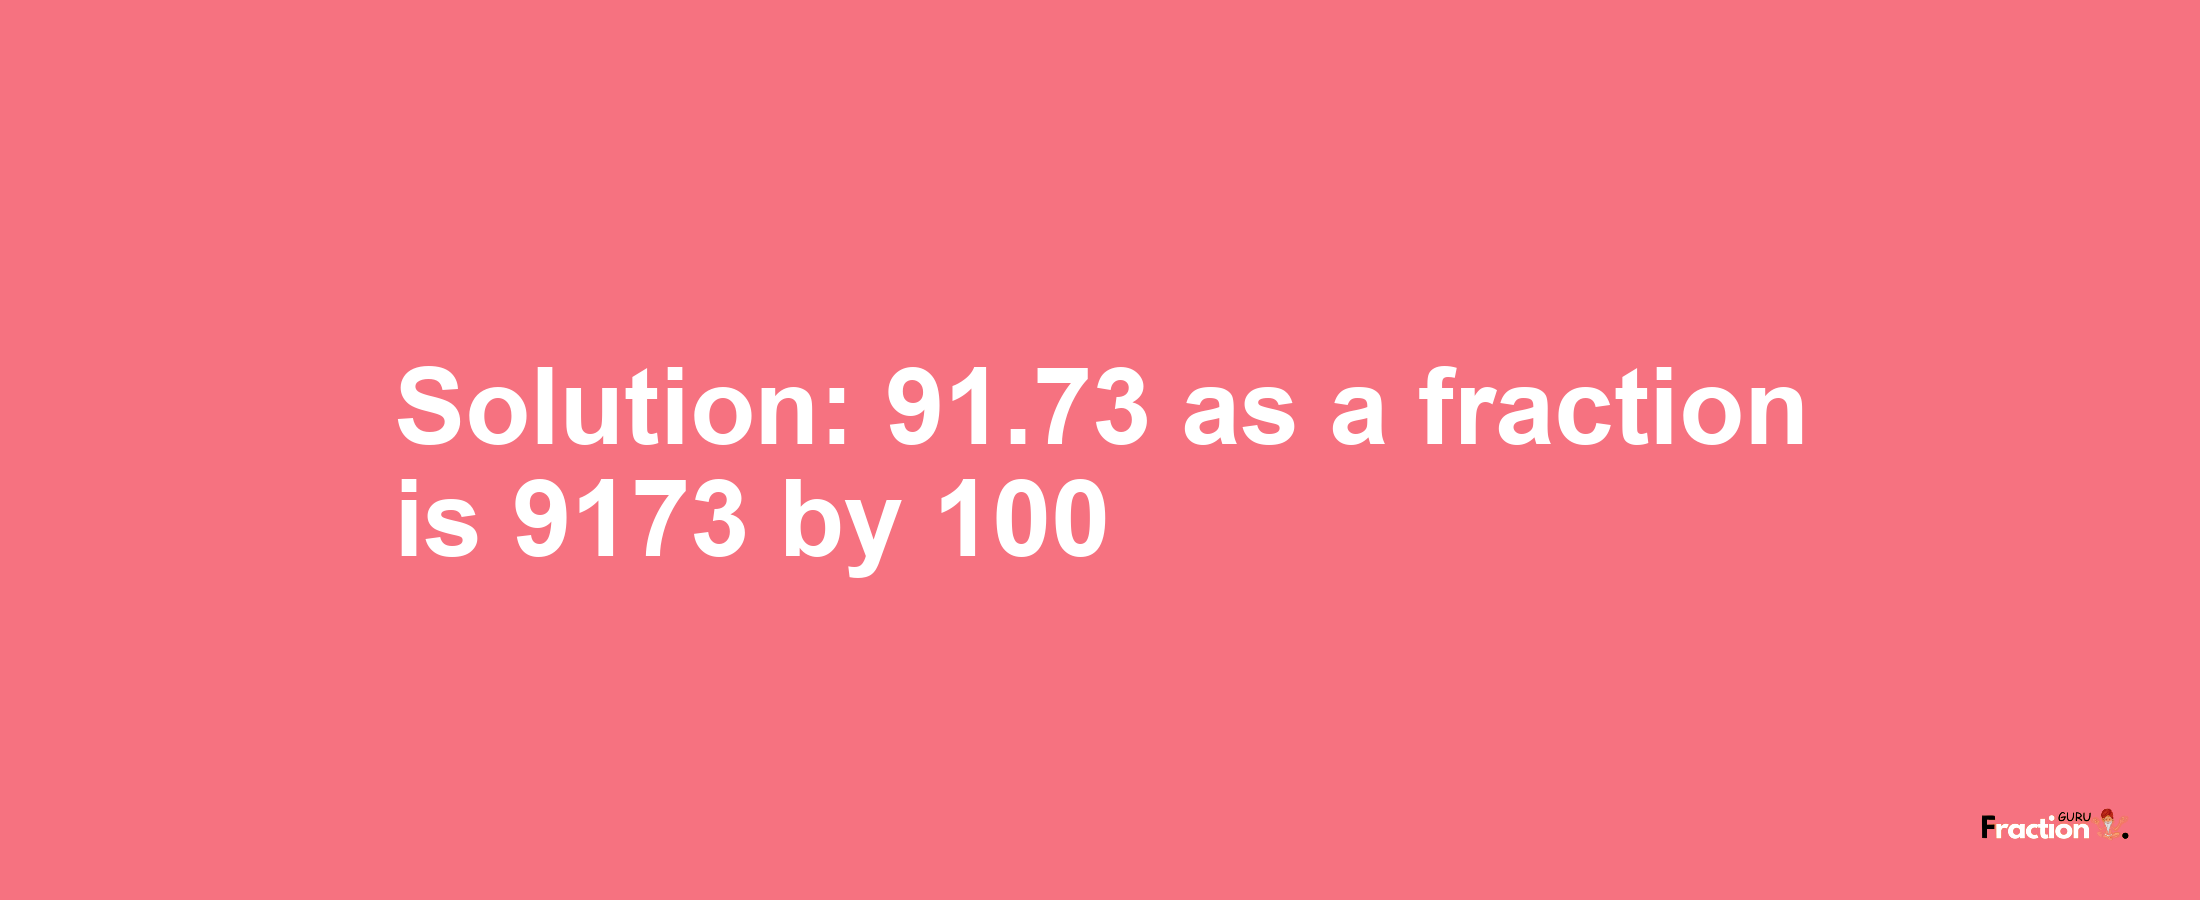 Solution:91.73 as a fraction is 9173/100